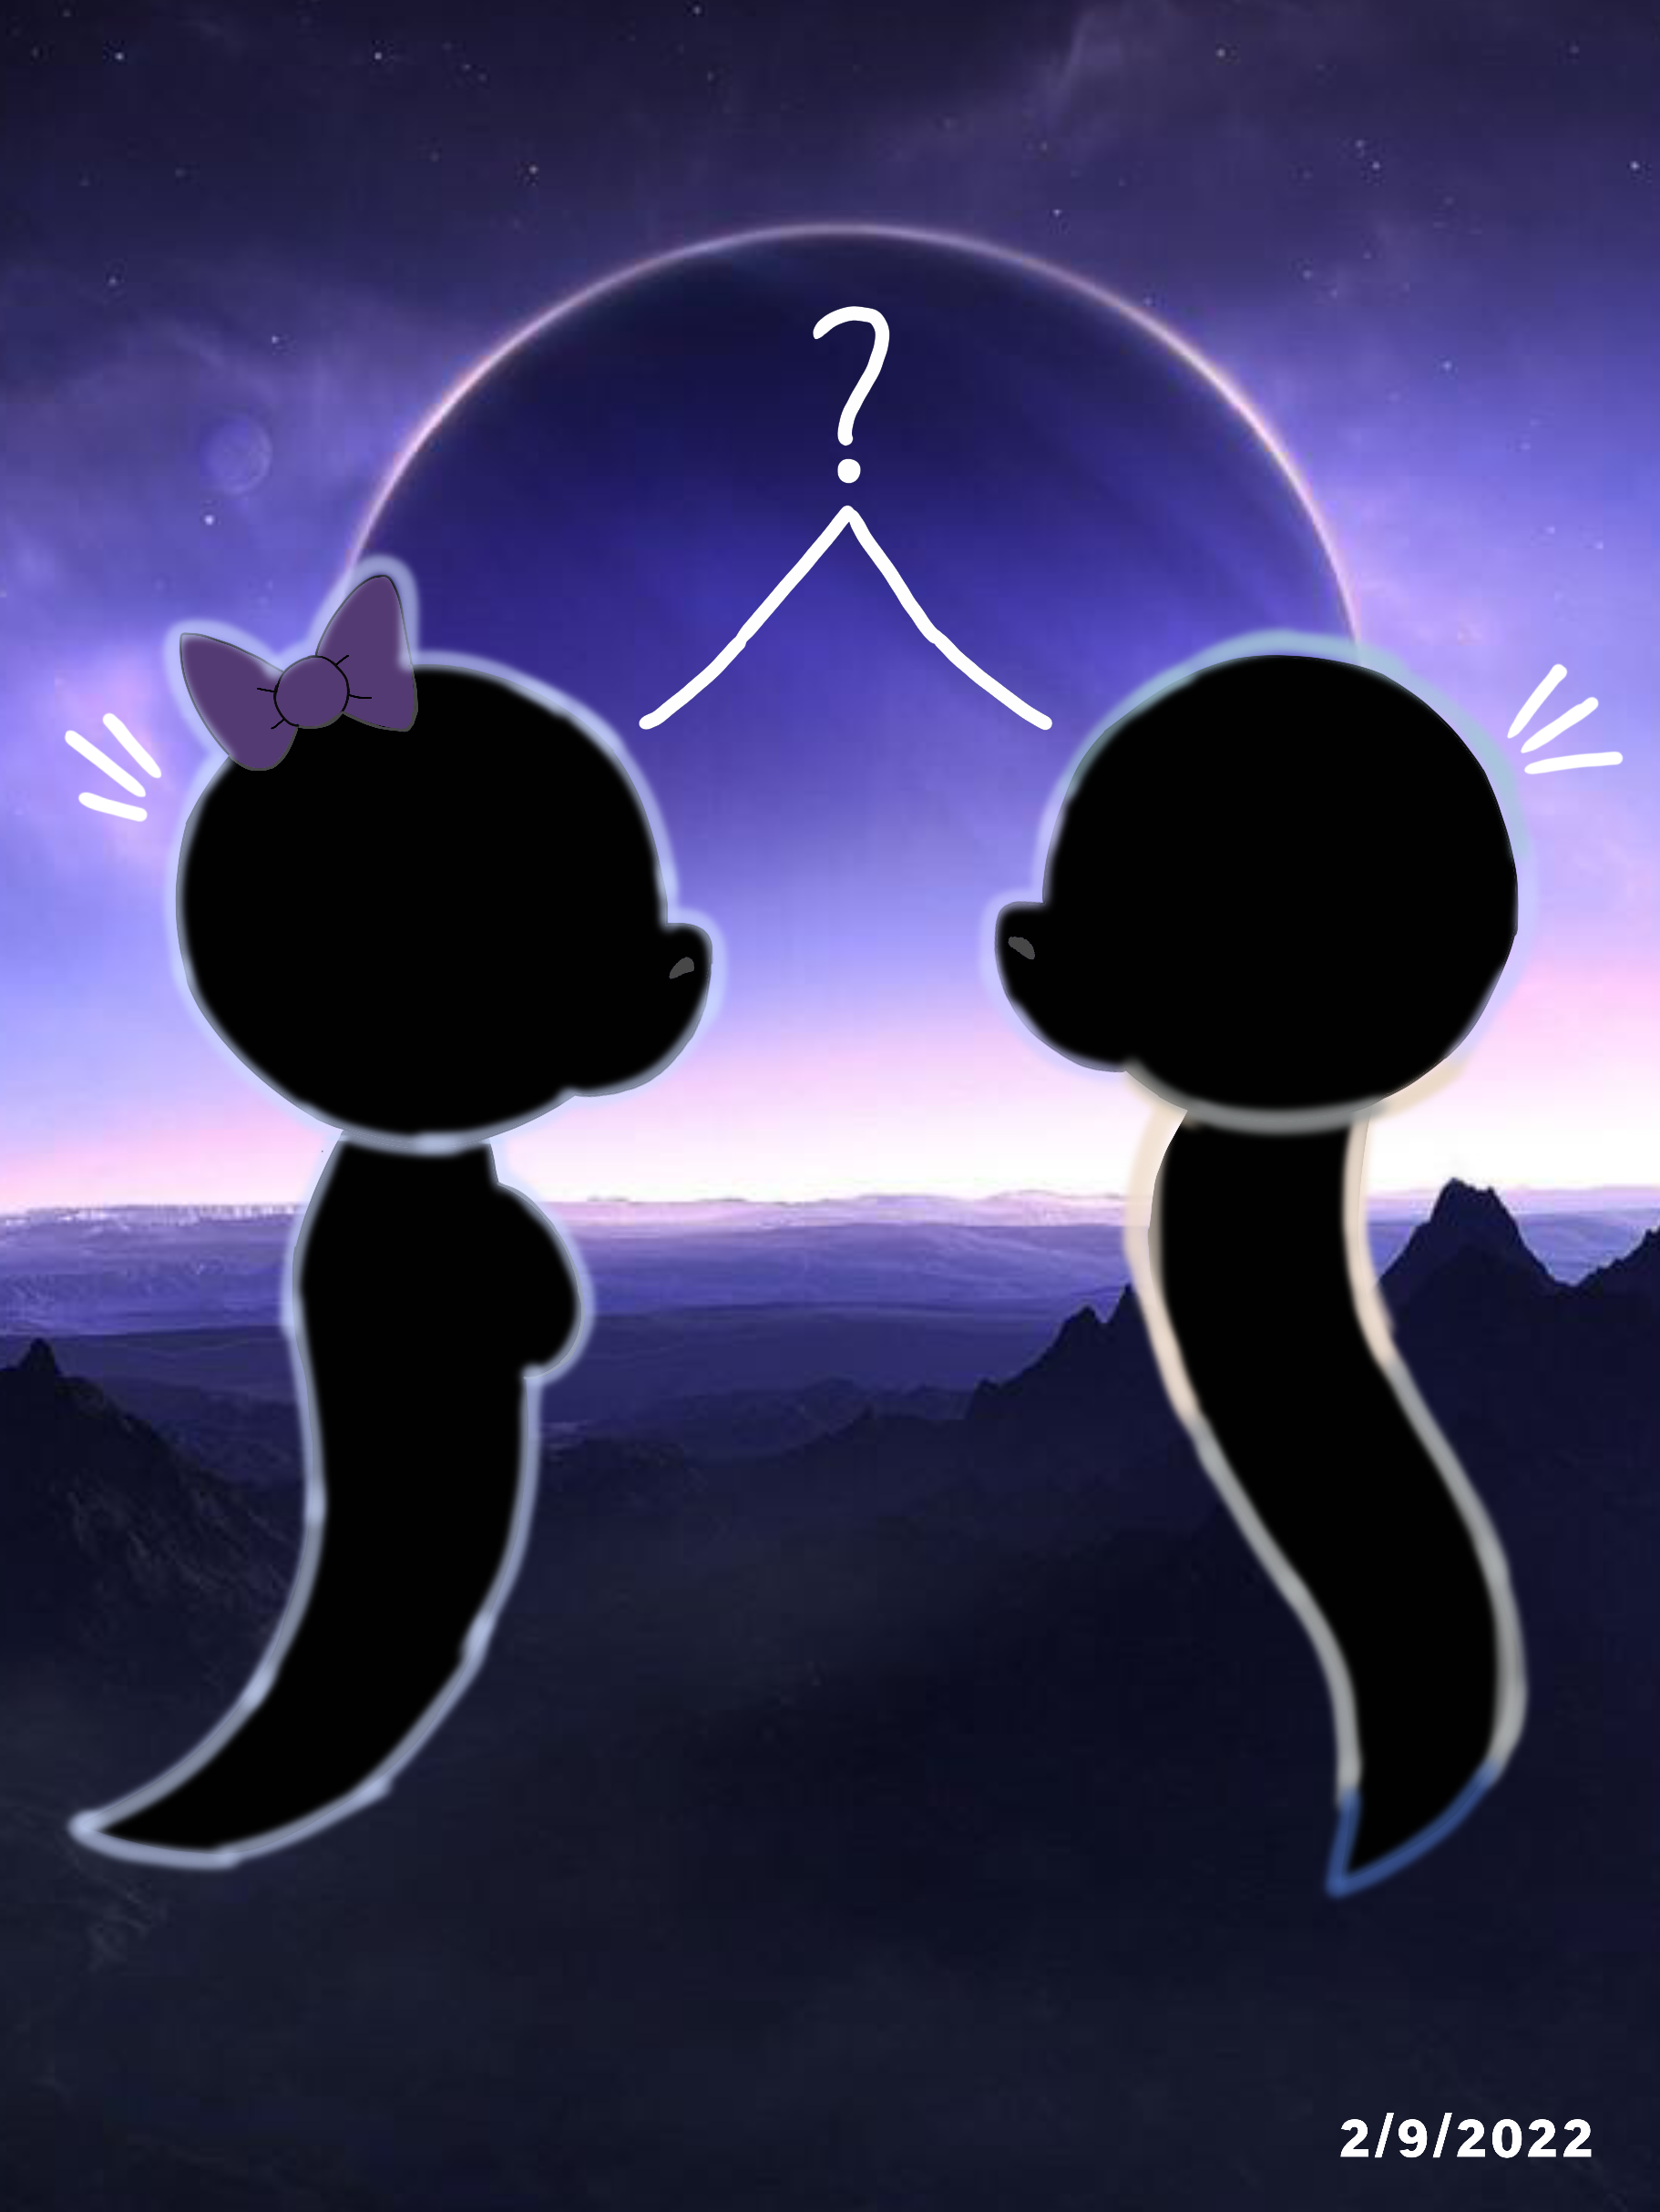 Drawing bfb assets #7 BLACK HOLE AND MATCH